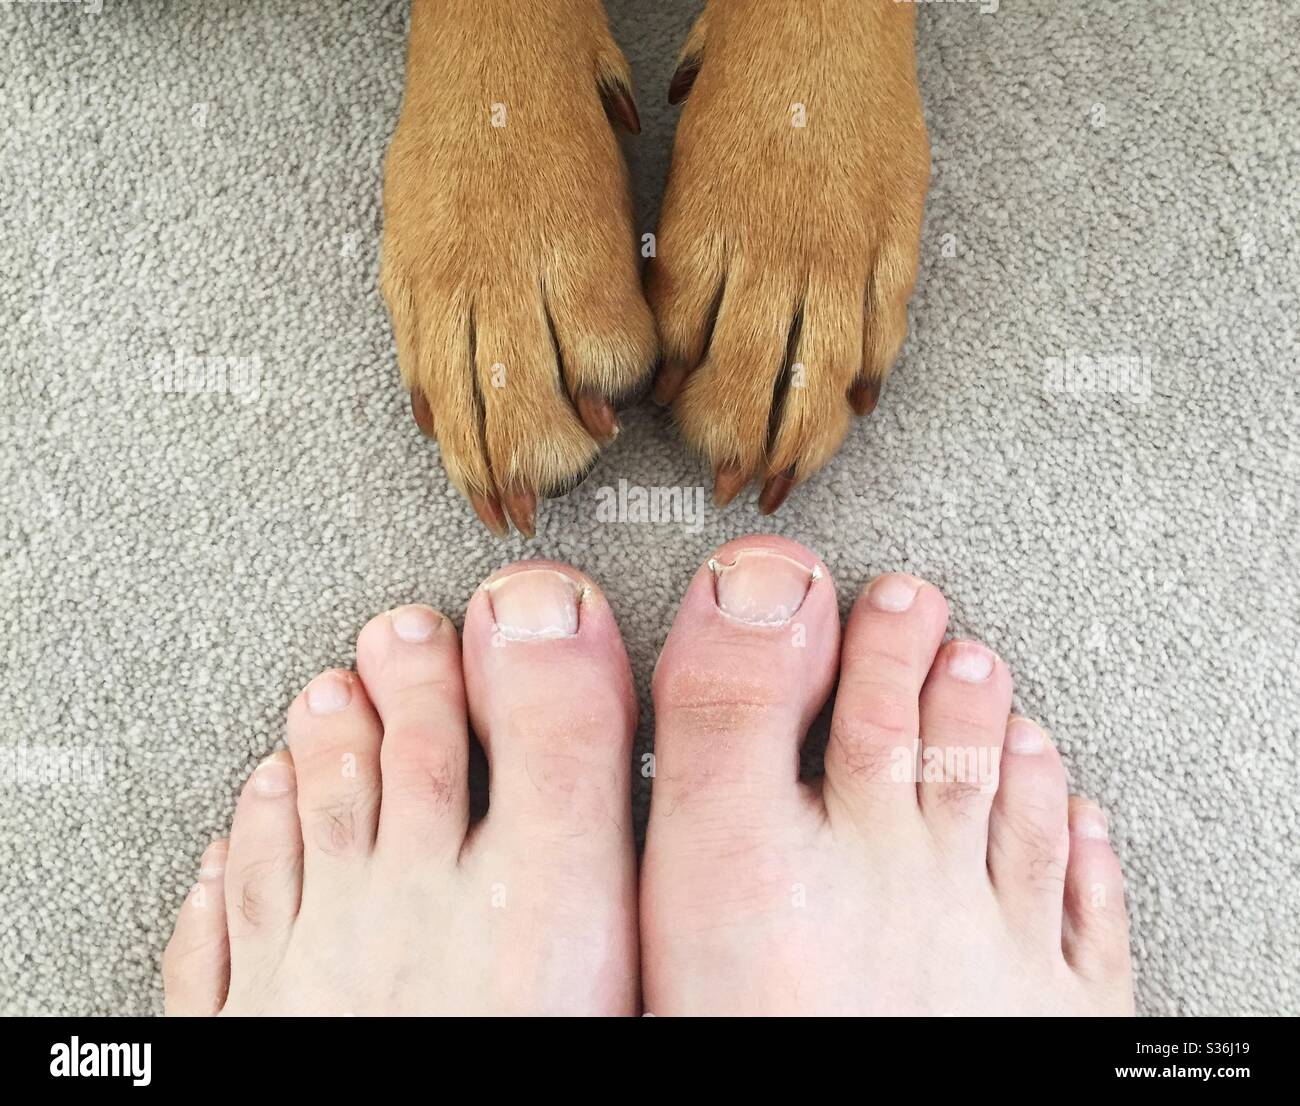 A foot selfie of human feet and dog’s paws Stock Photo